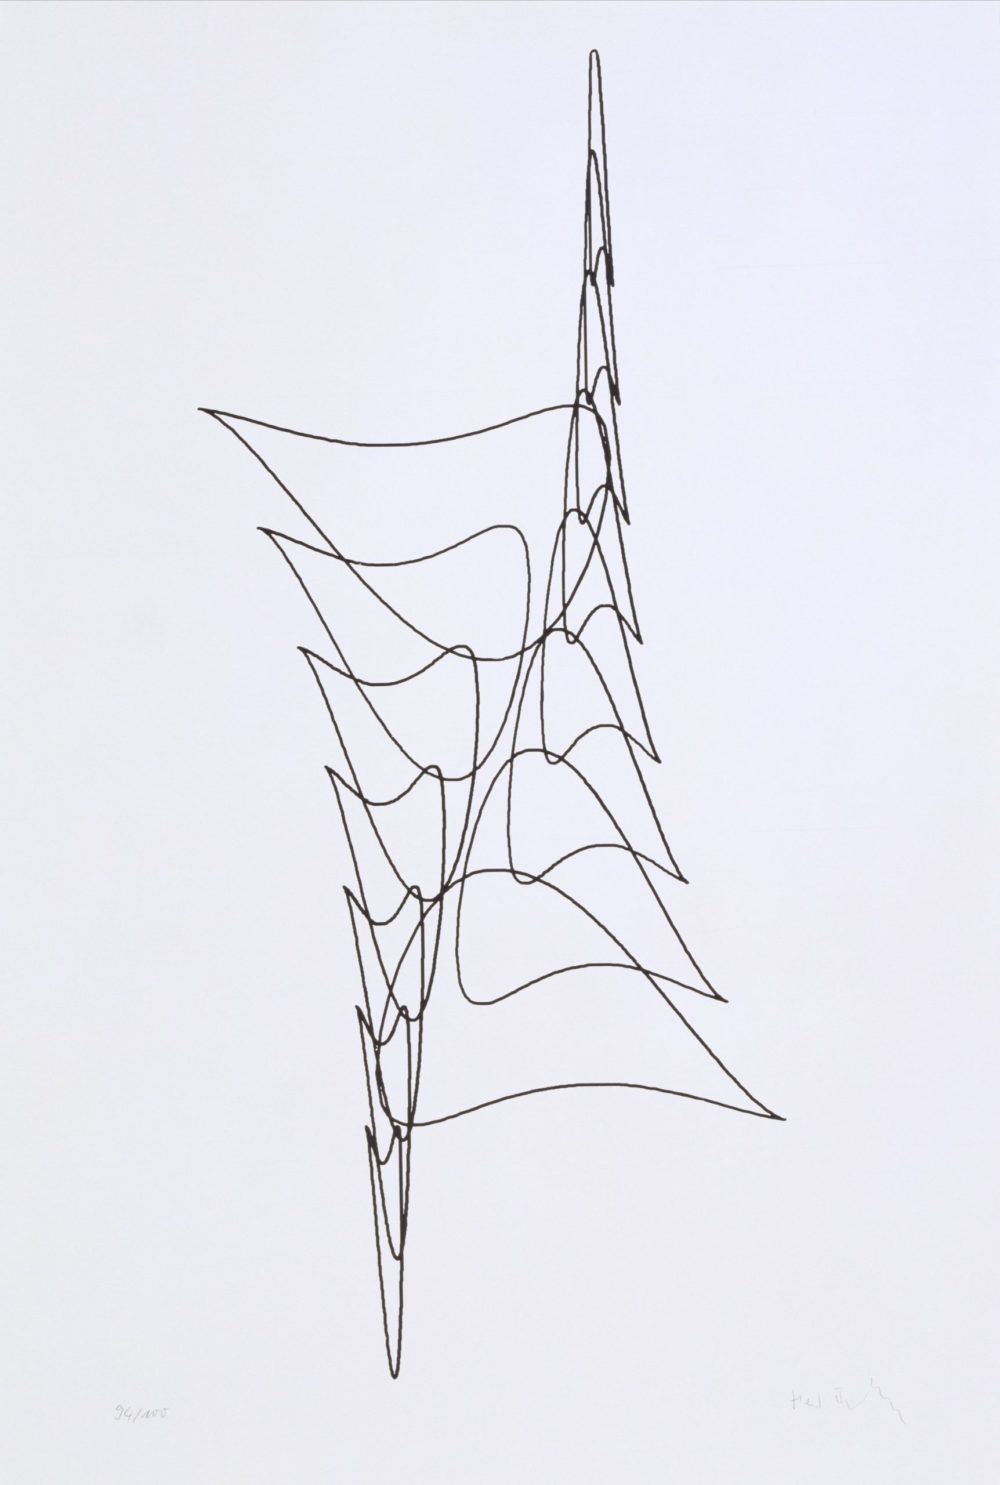 Herbert W. Franke in collaboration with Peter Henne, KAES serie, plotter drawing, ink on paper, 70 x 50 cm, 1969